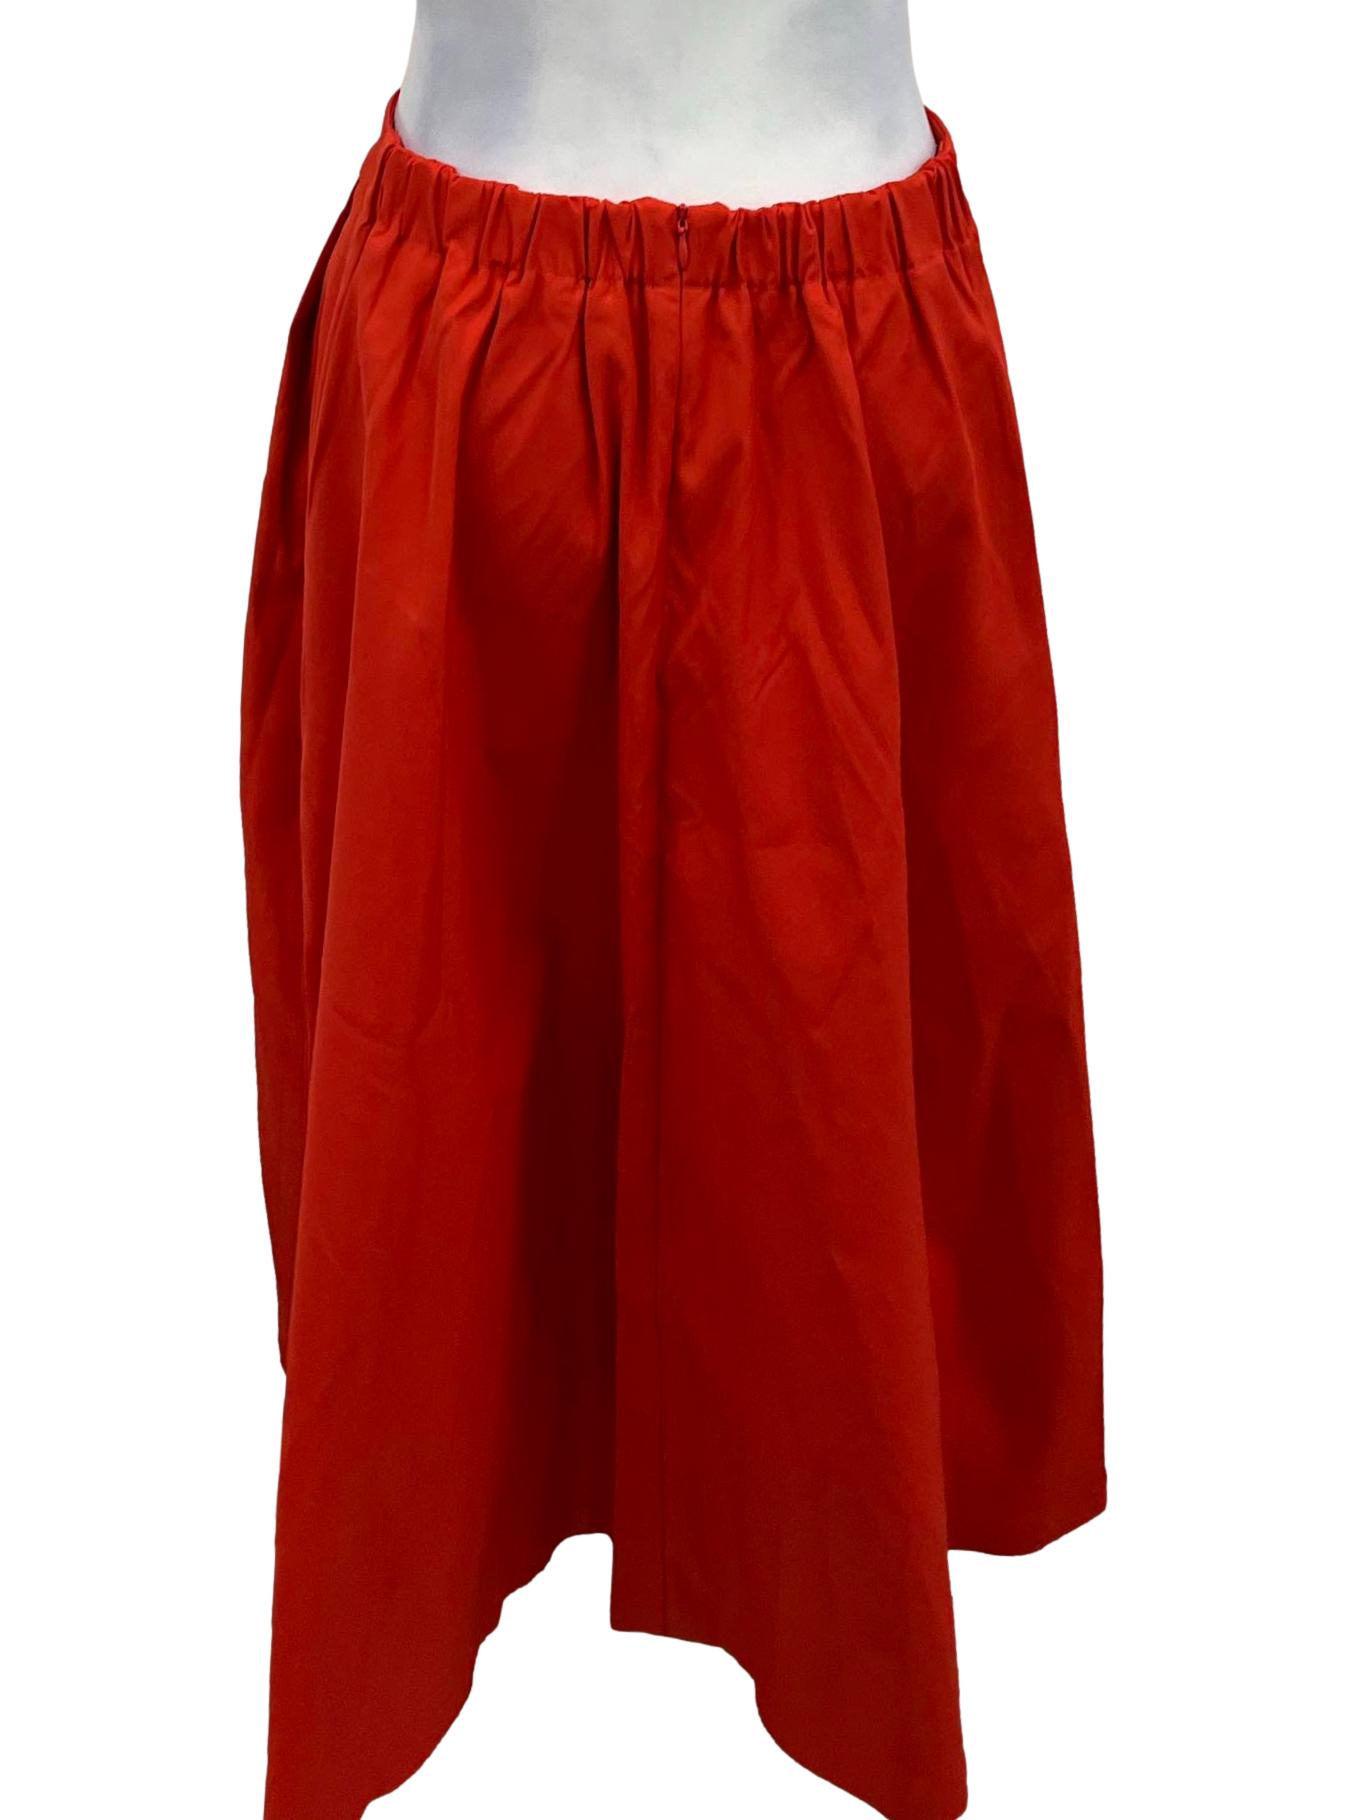 Candy Red Flare Skirt